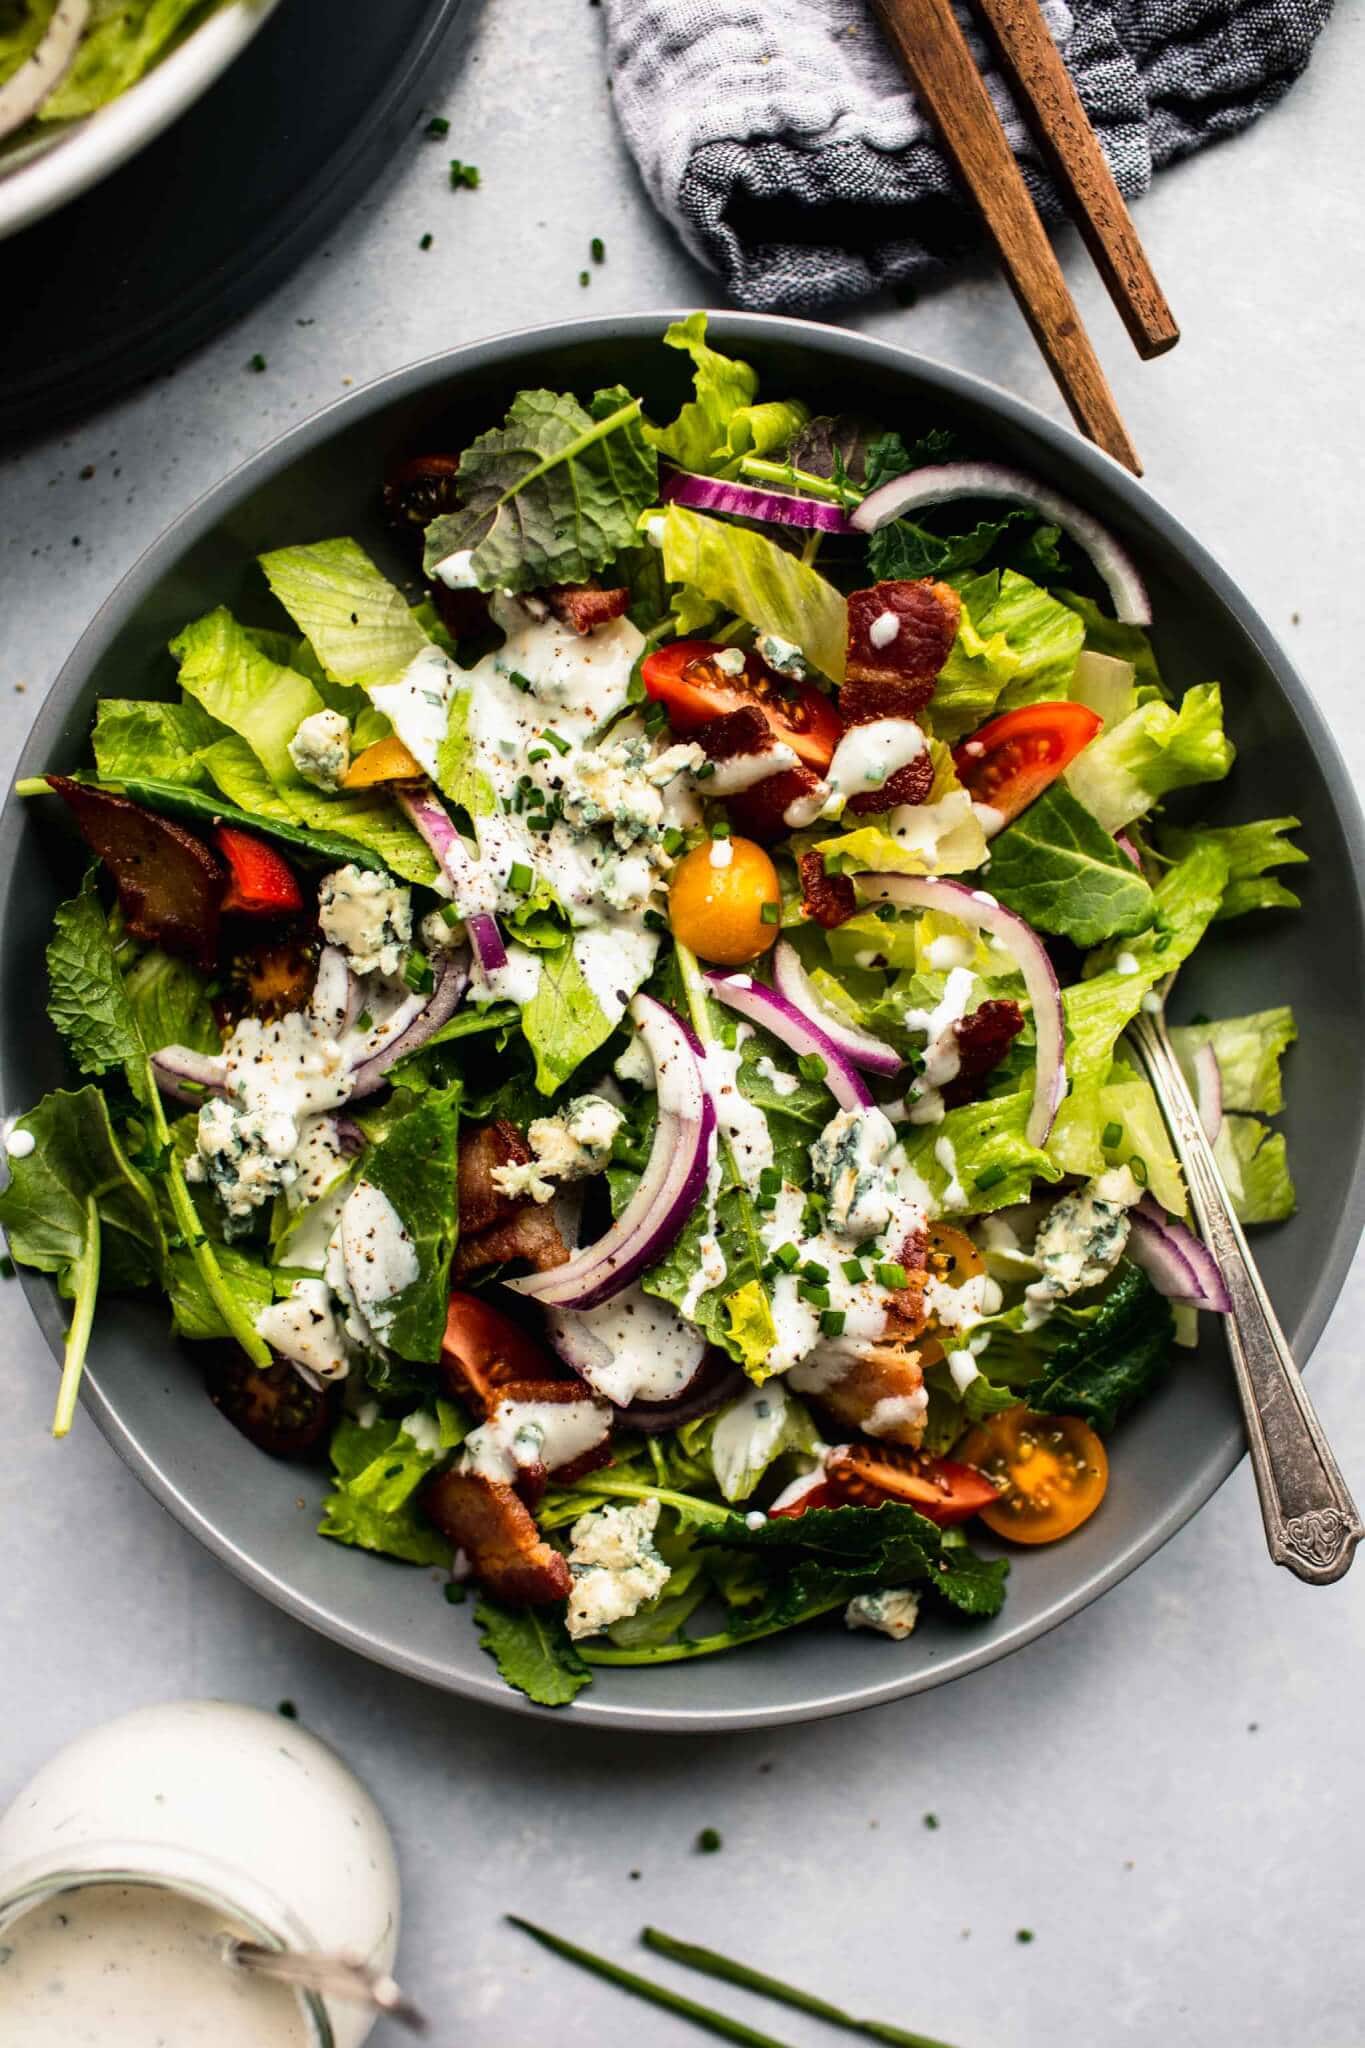 Green salad in grey bowl topped with red onions, tomatoes and blue cheese dressing, with serving utensils and small jar of dressing.